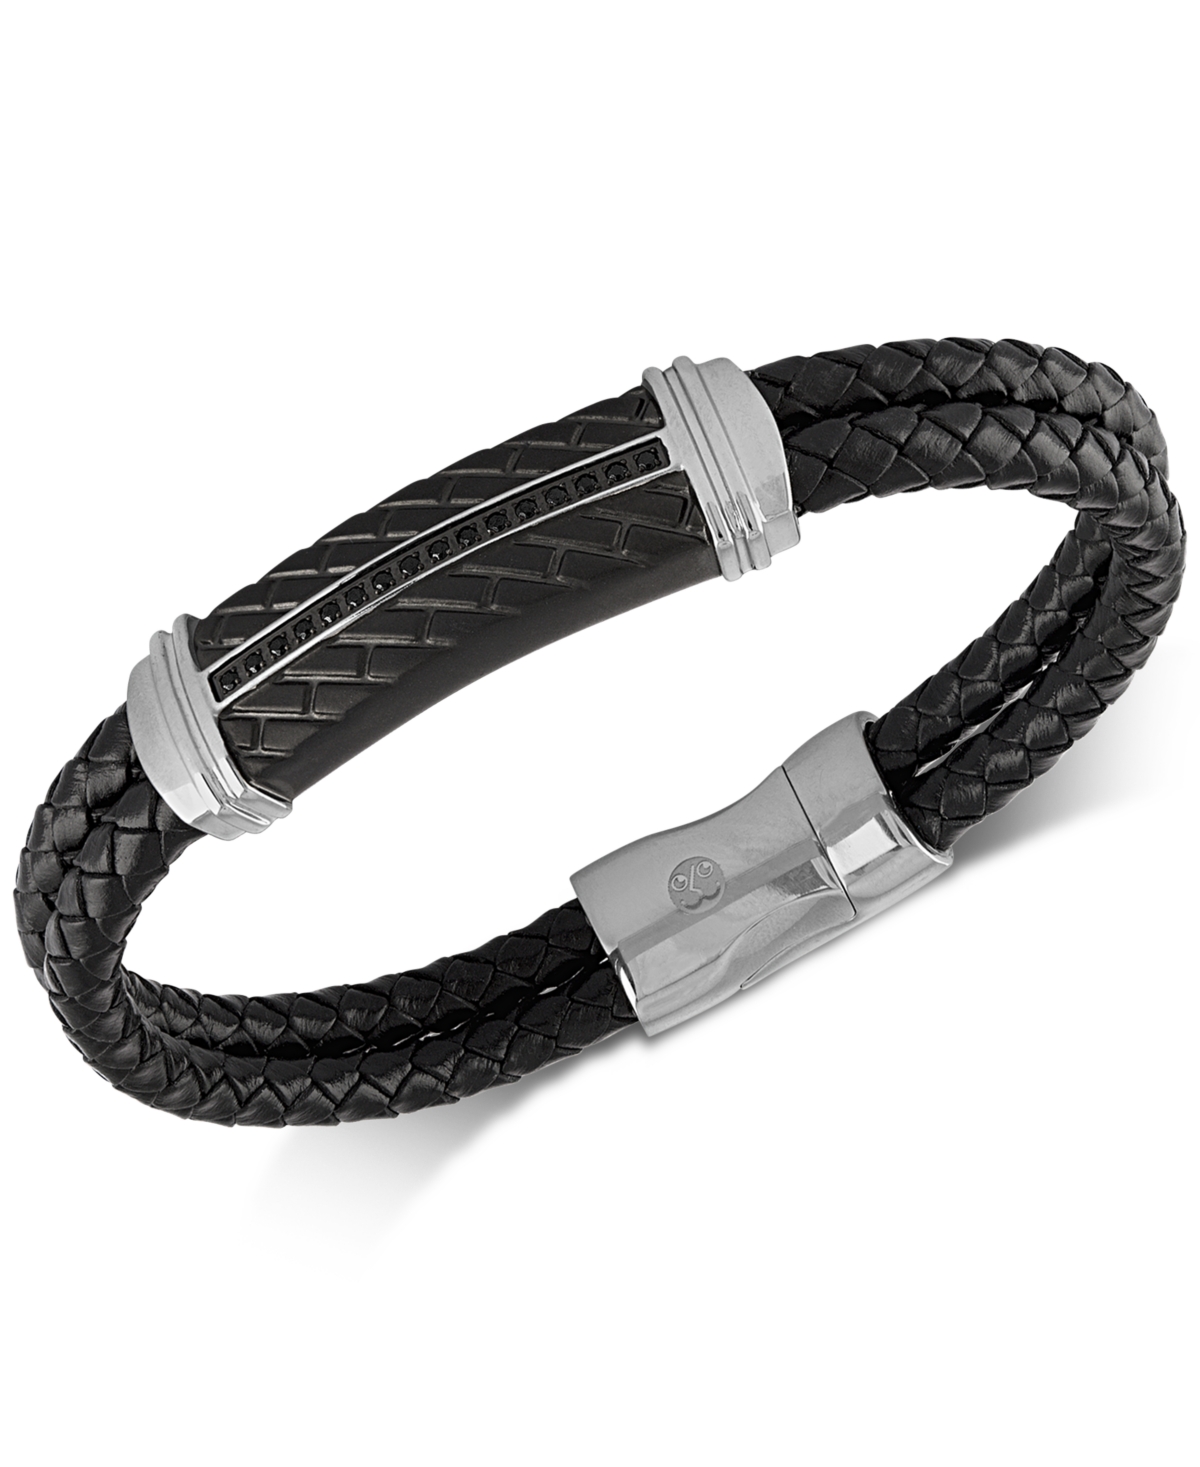 Diamond & Leather Bracelet in Stainless Steel & Black Ion-Plate, Created for Macy's - Black